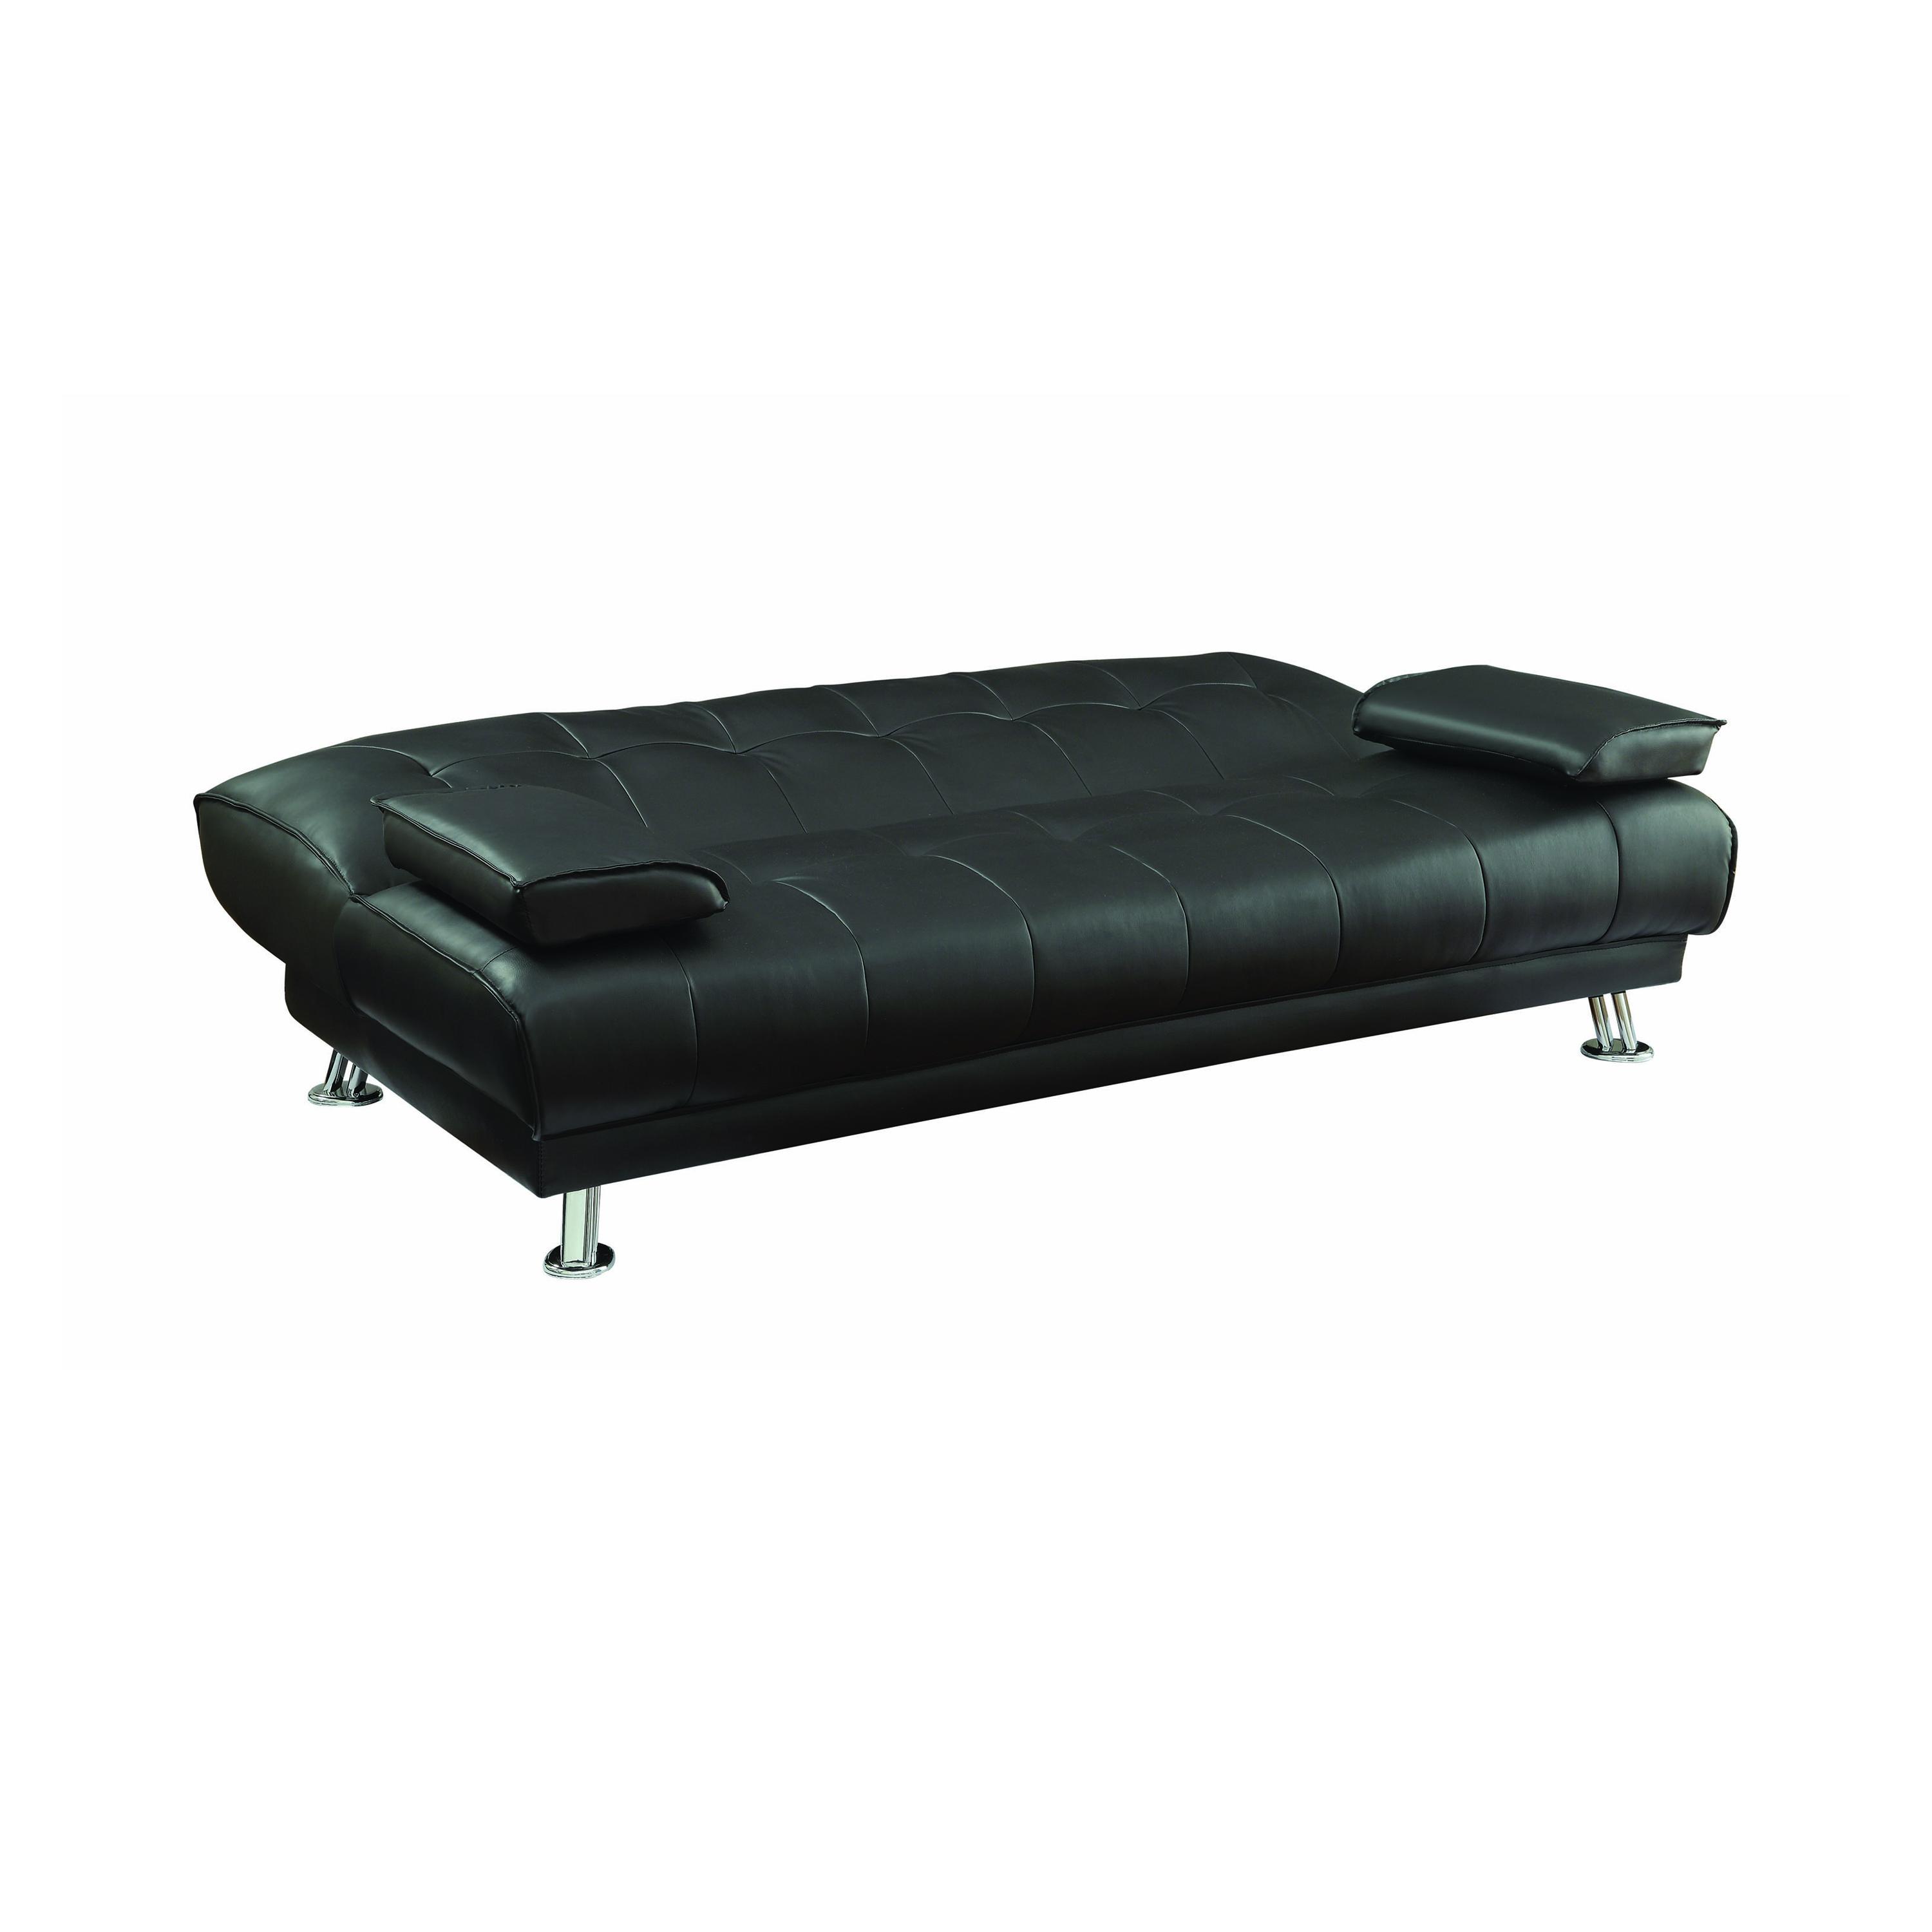 

    
Transitional Black Leatherette Sofa Bed Coaster 300205 Pierre
